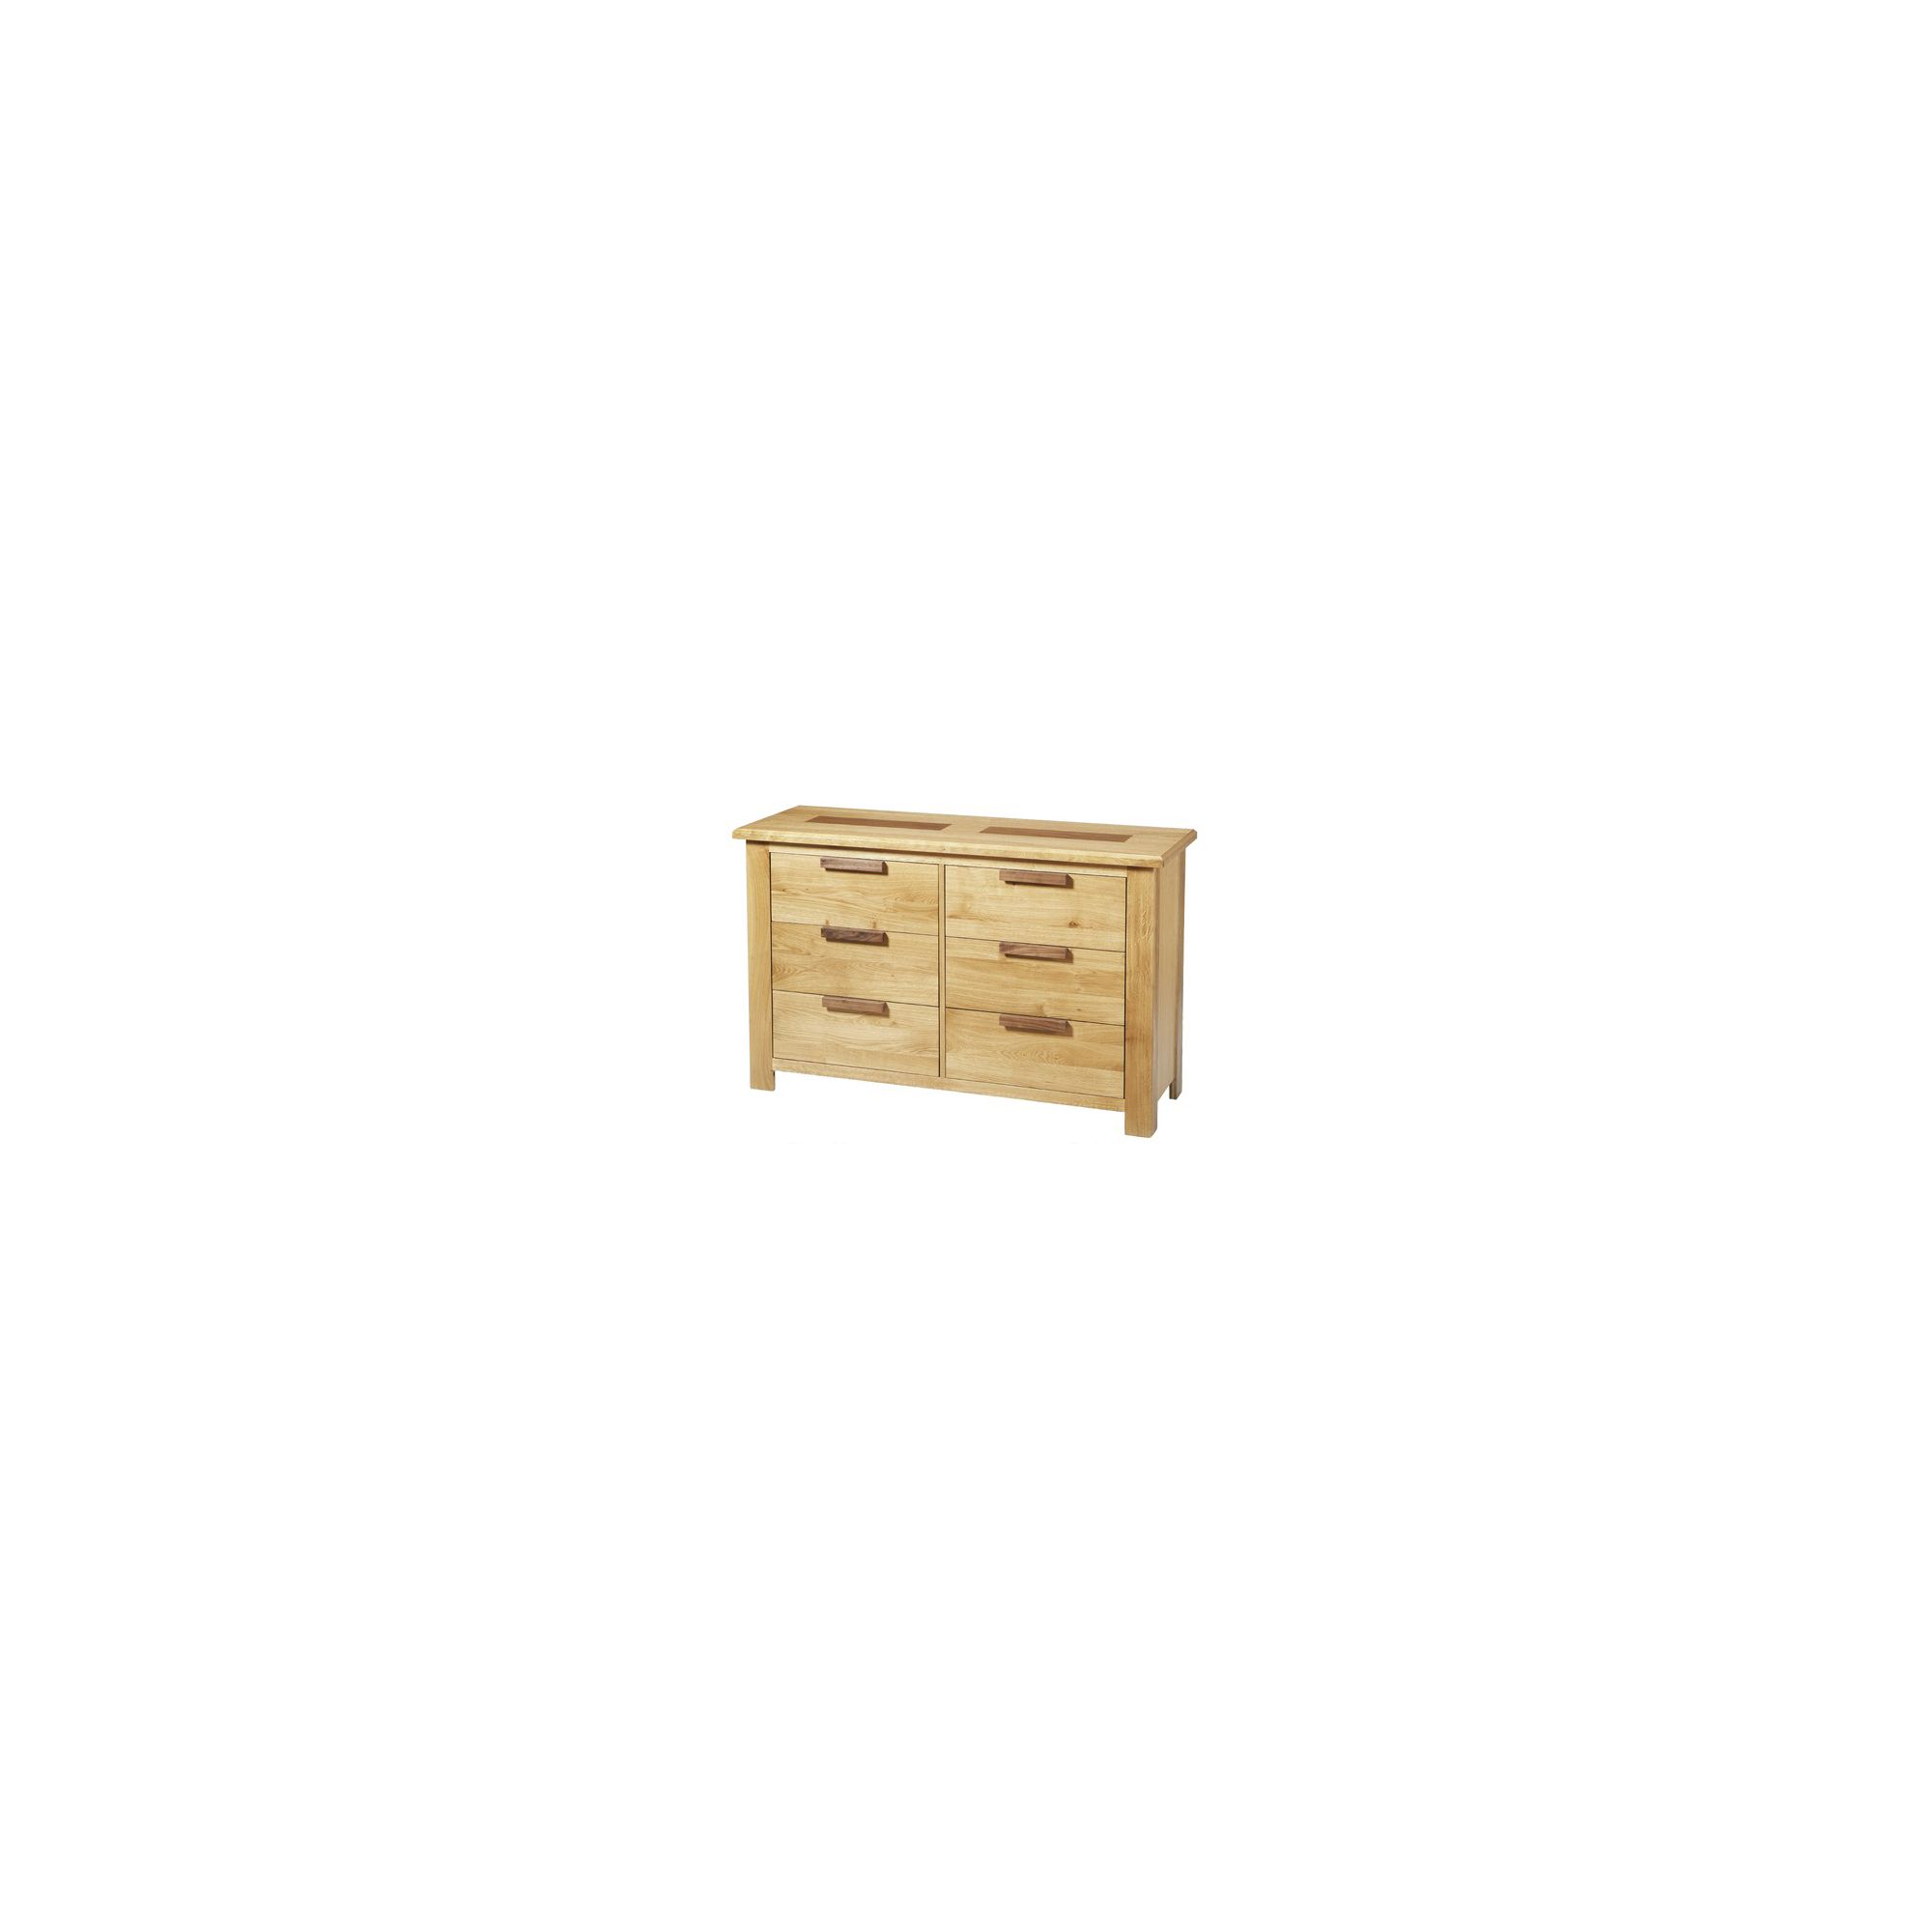 Sherry Designs Lavella Bedroom 6 Drawer Oak Chest at Tesco Direct